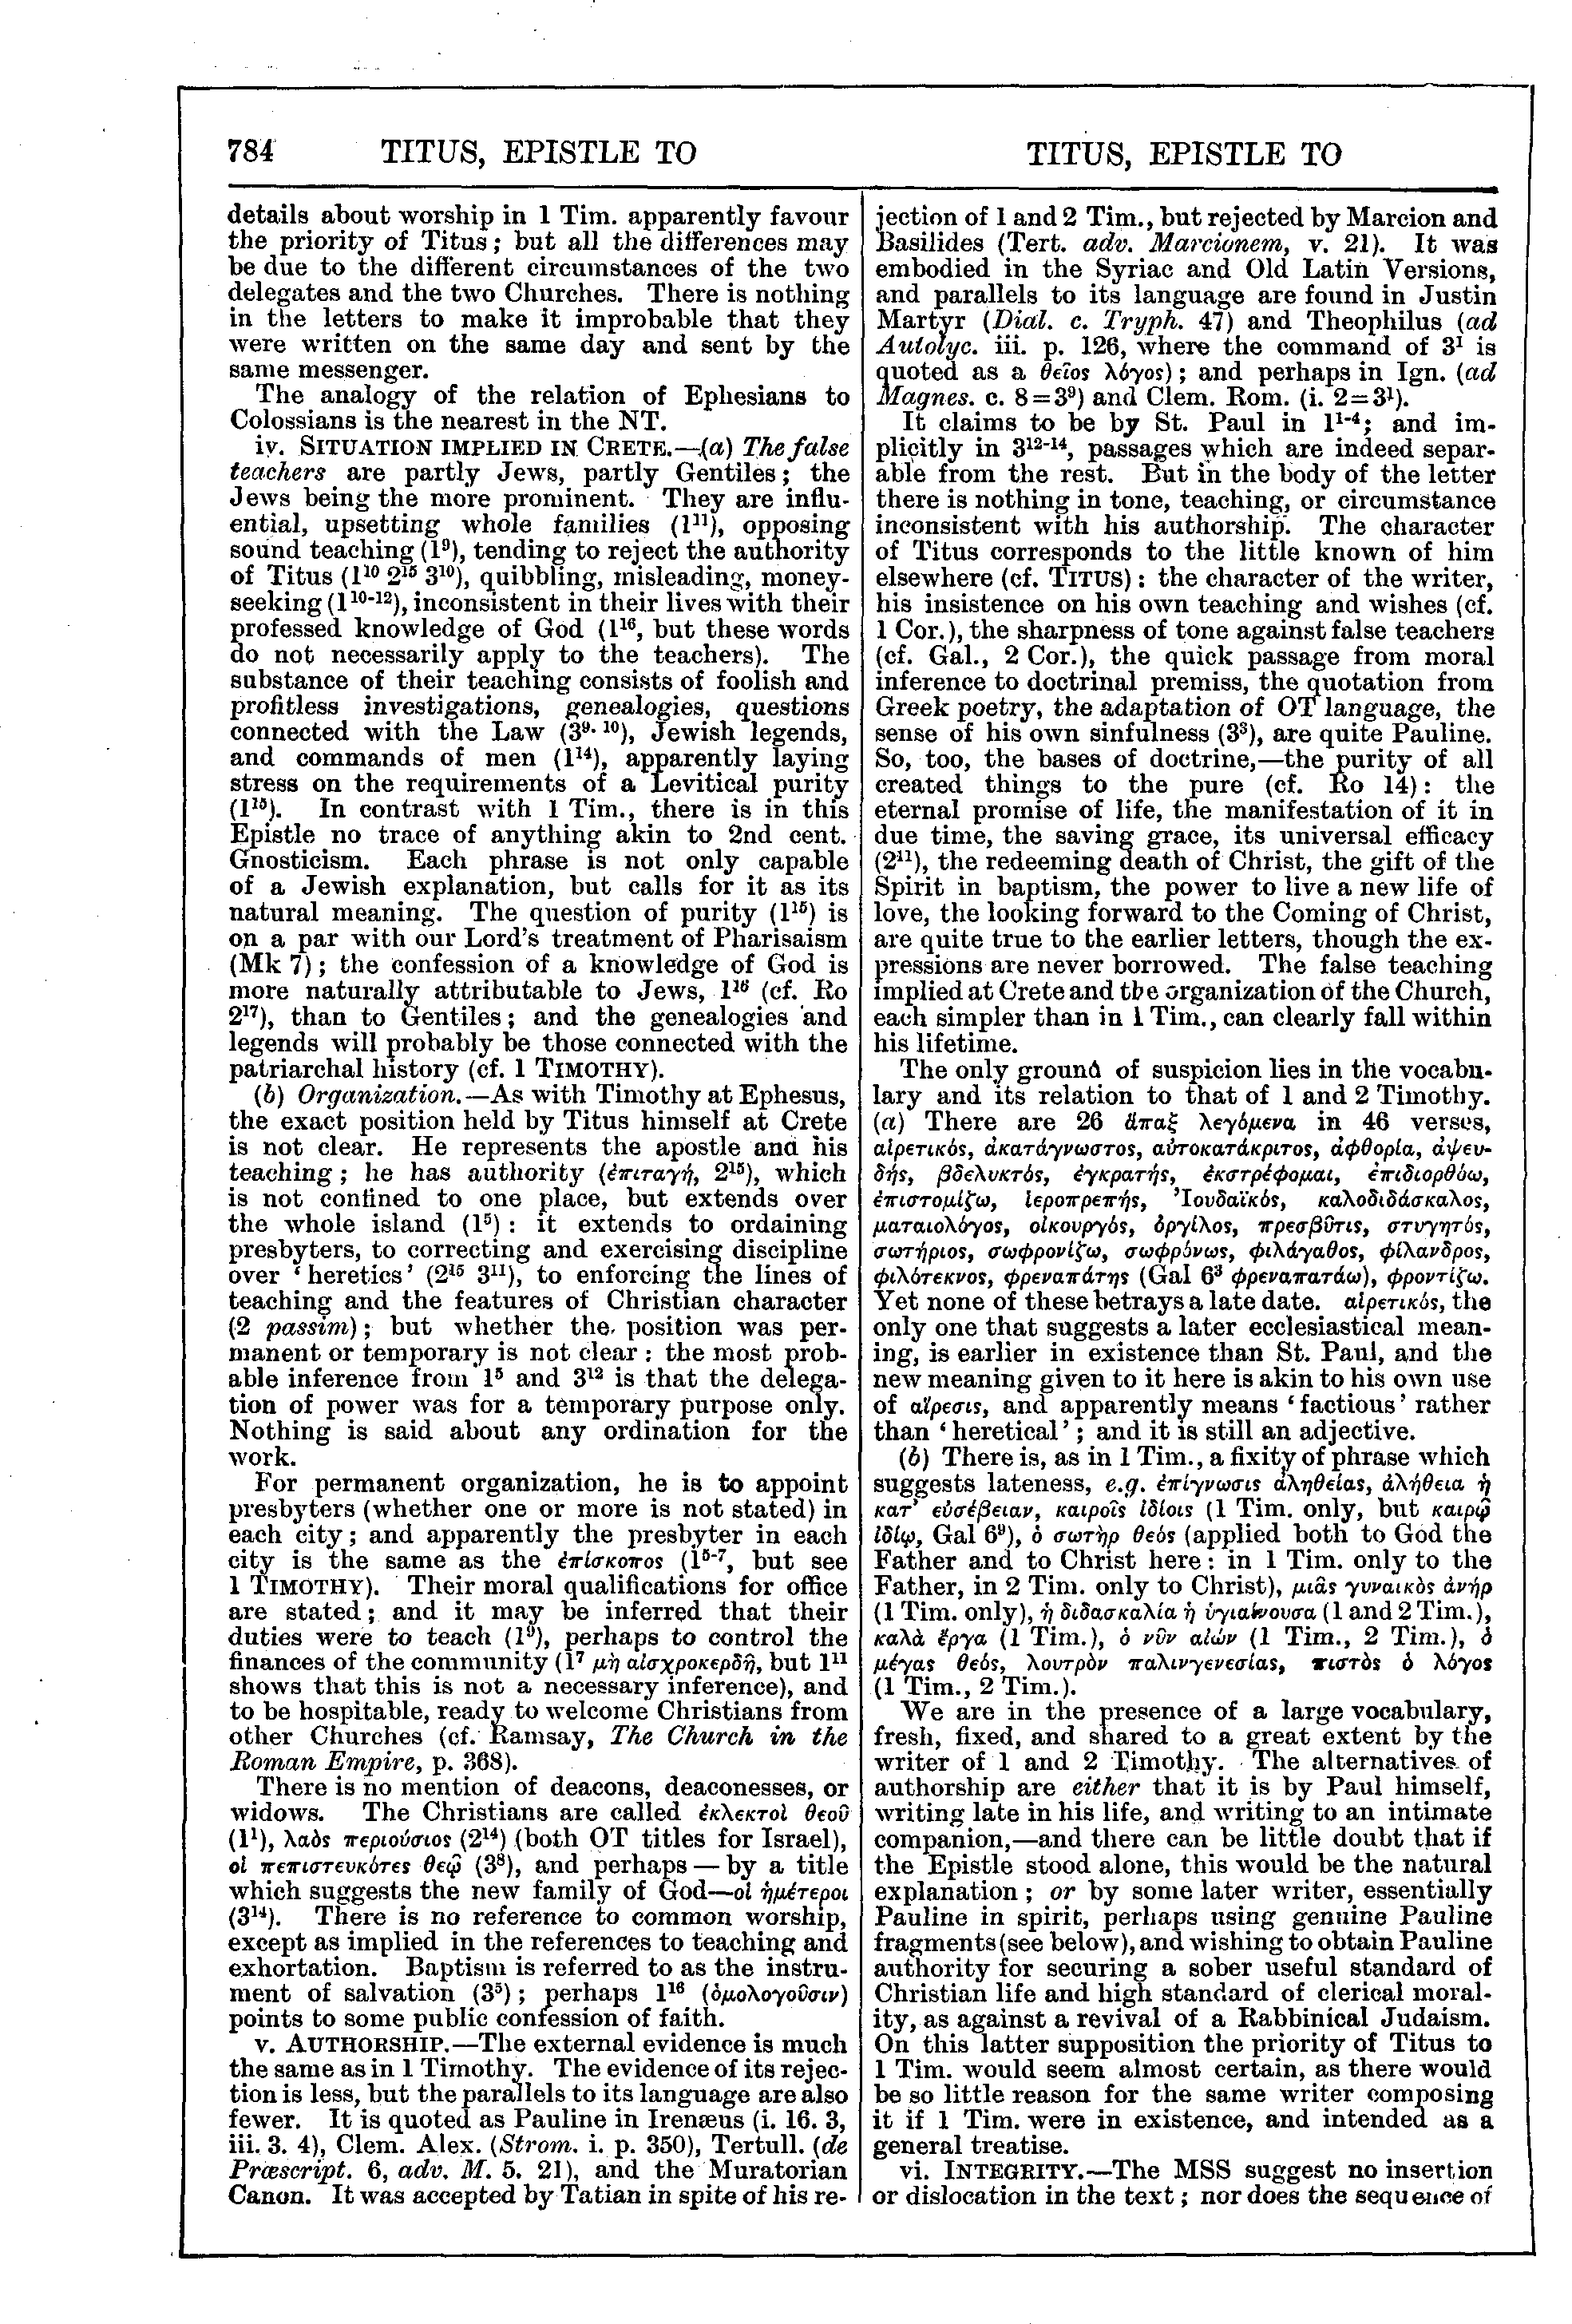 Image of page 784